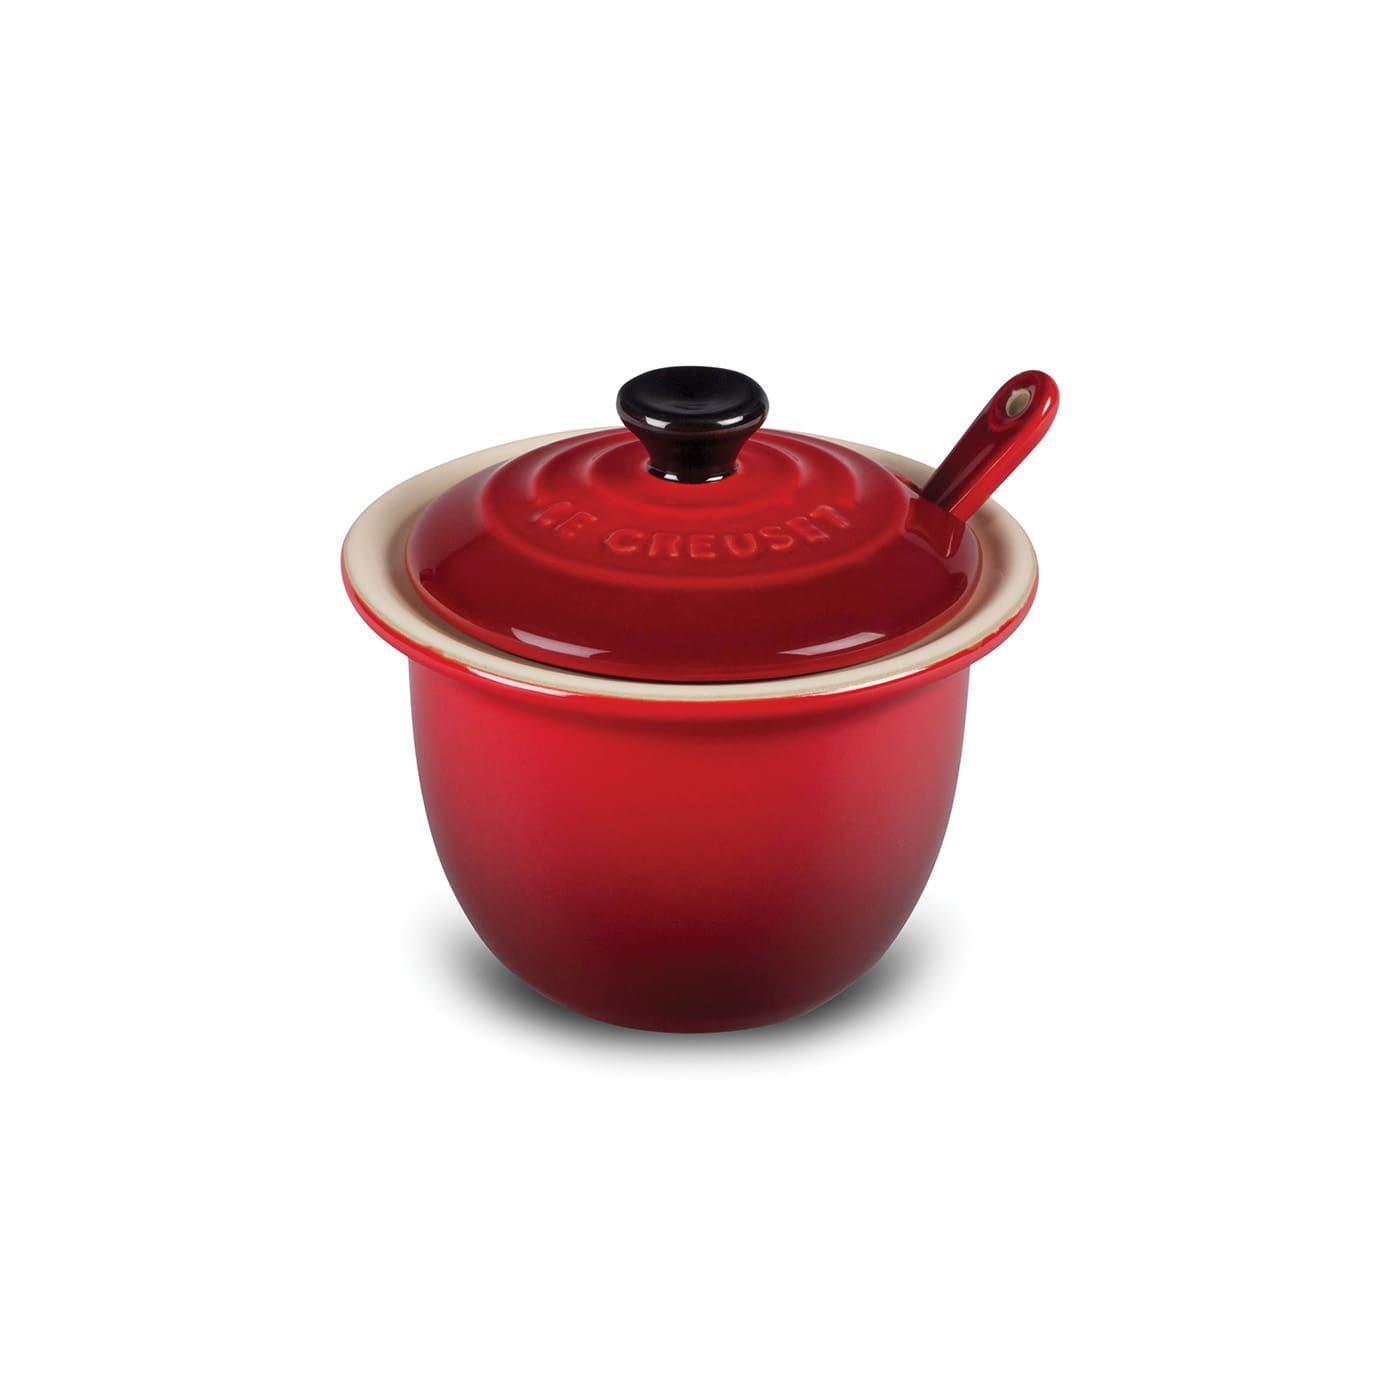 Udrydde Fordampe svært Le Creuset – Stoneware Condiment Pot with Spoon | Cerise/Cherry Red + :  Kitchen Sink Inc | Franklin, NC | Cookware, Bakeware, Cutlery, Small  Appliances, Specialty Items, Fine China and more.